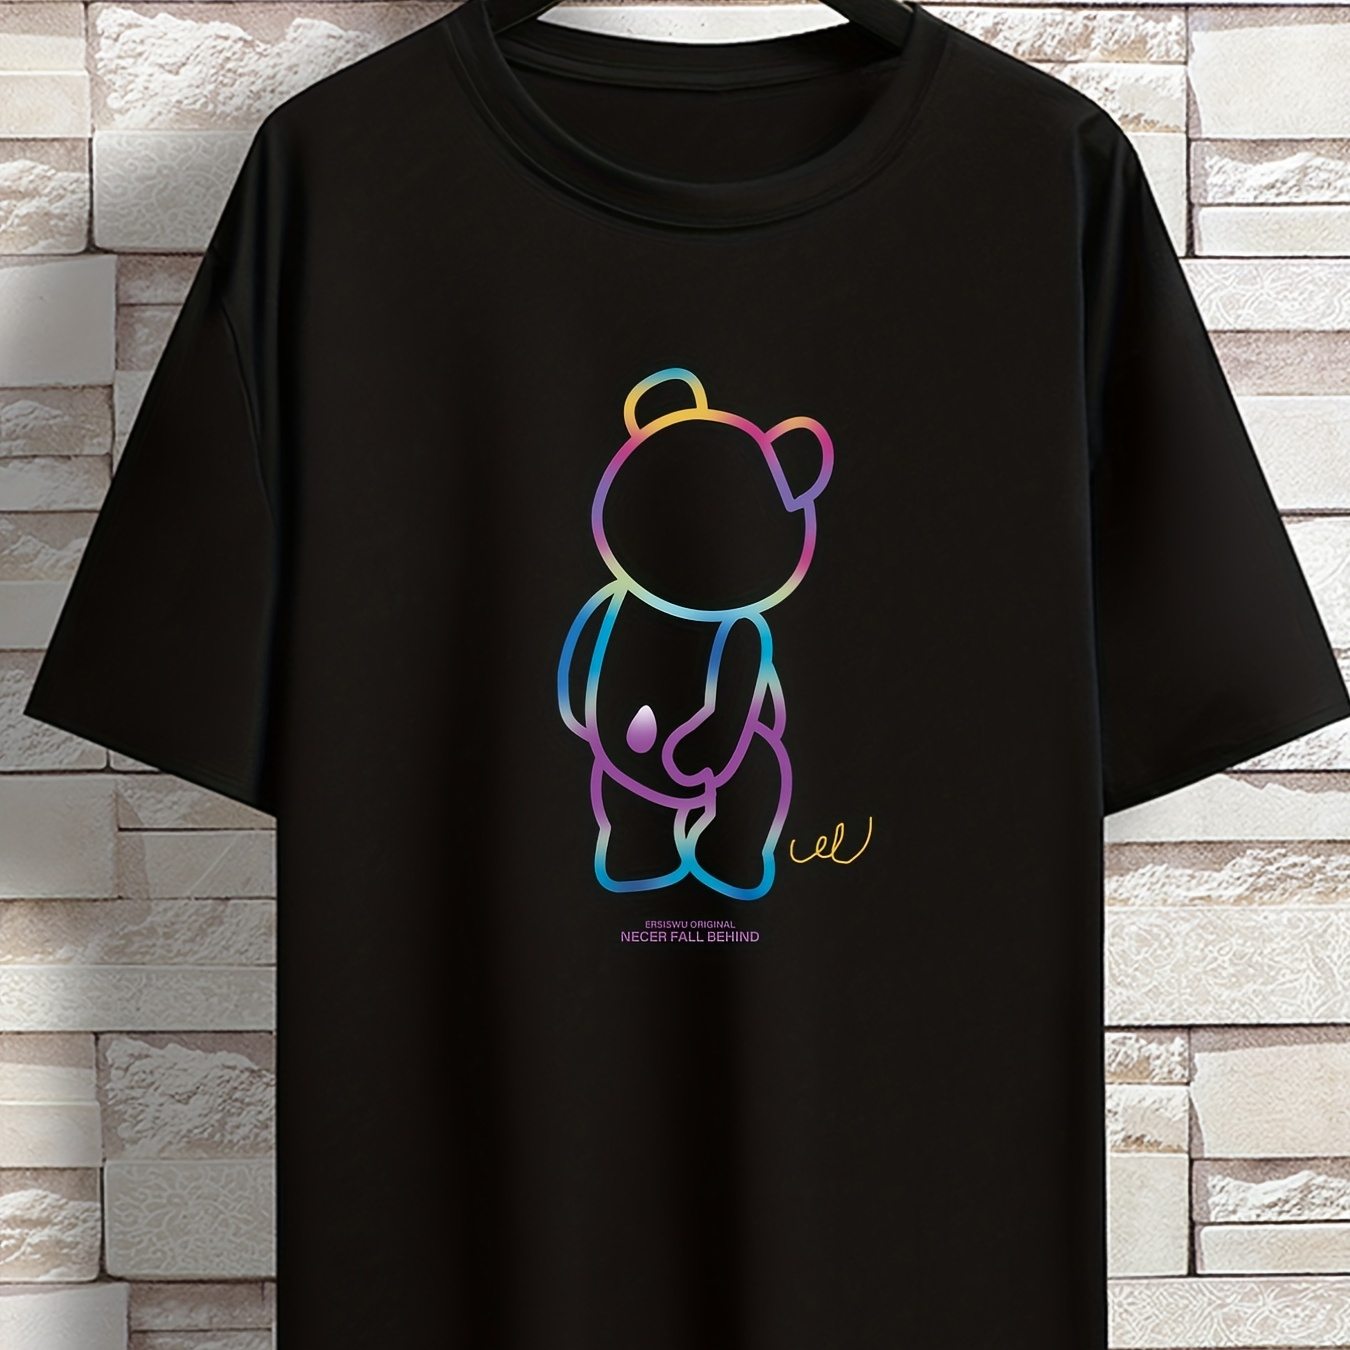 

Plus Size Men's Casual Graphic Tees For Summer, "colorful Bear" Print Crew Neck Oversized T-shirts, Trendy Chic Outfit Men's Clothings